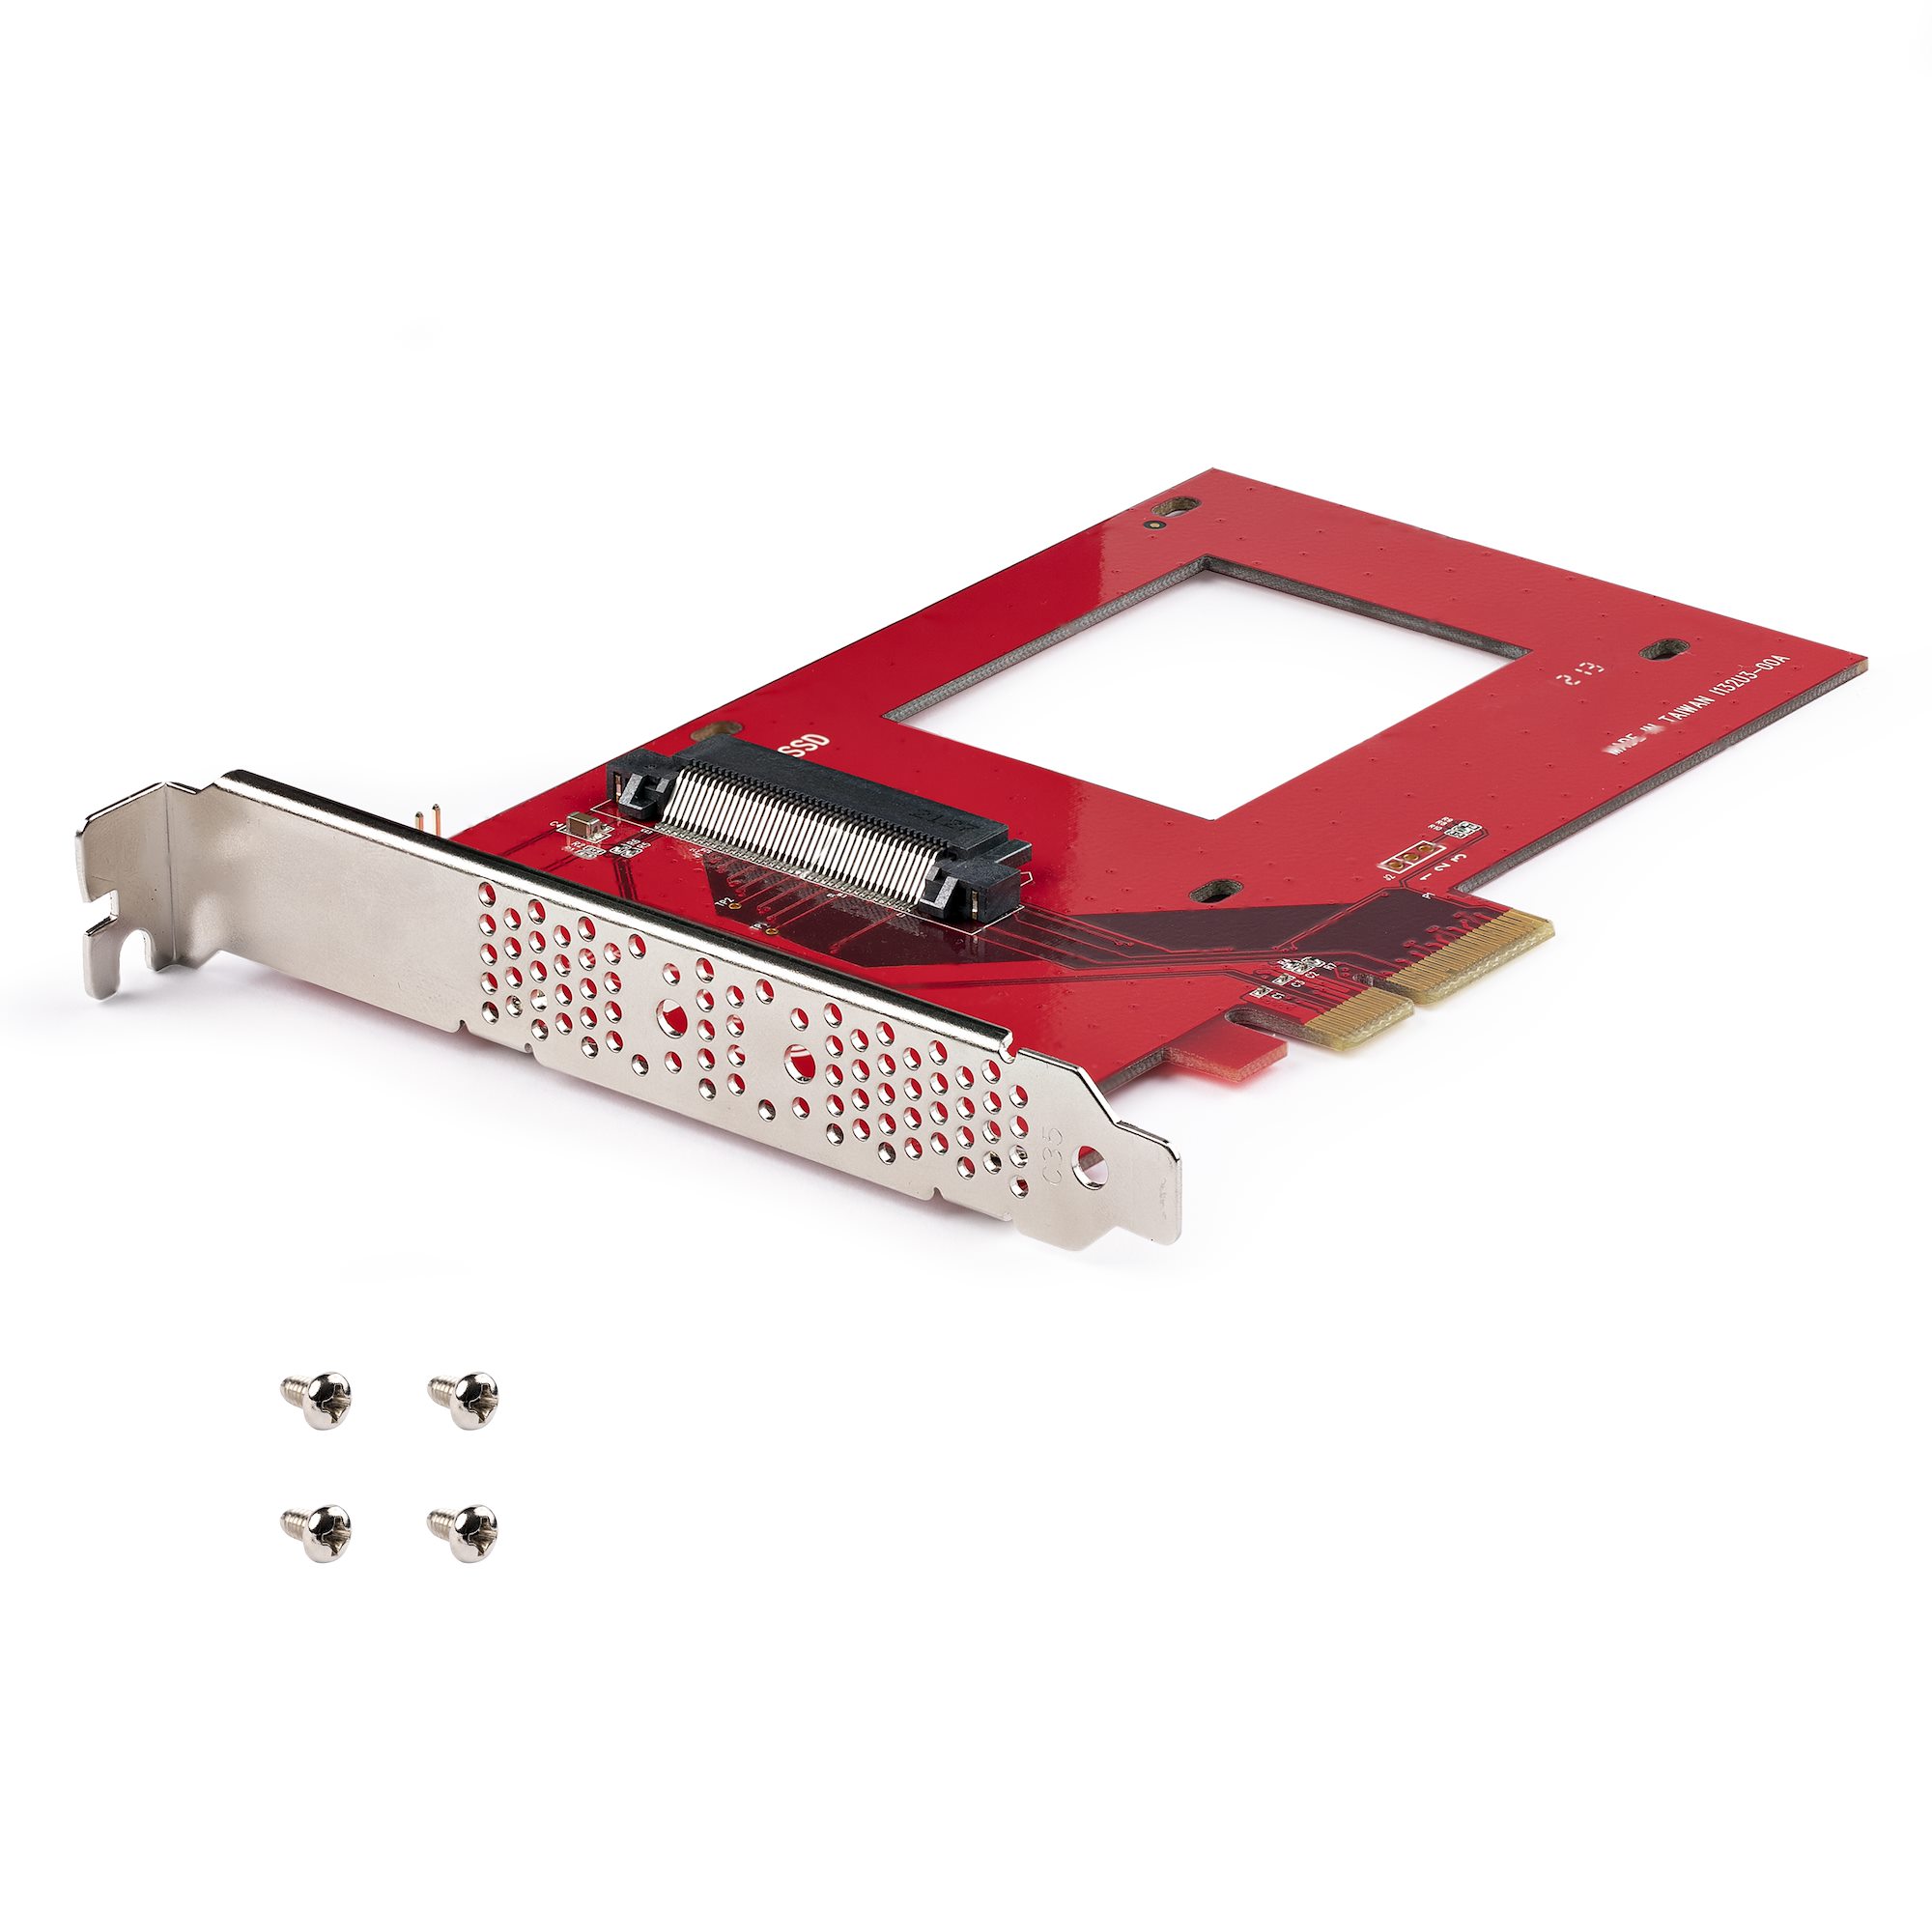 U.2 Support U.2 Card X4 PCIe SSD SATA to to Adapter PCI-E 3.0 SSD